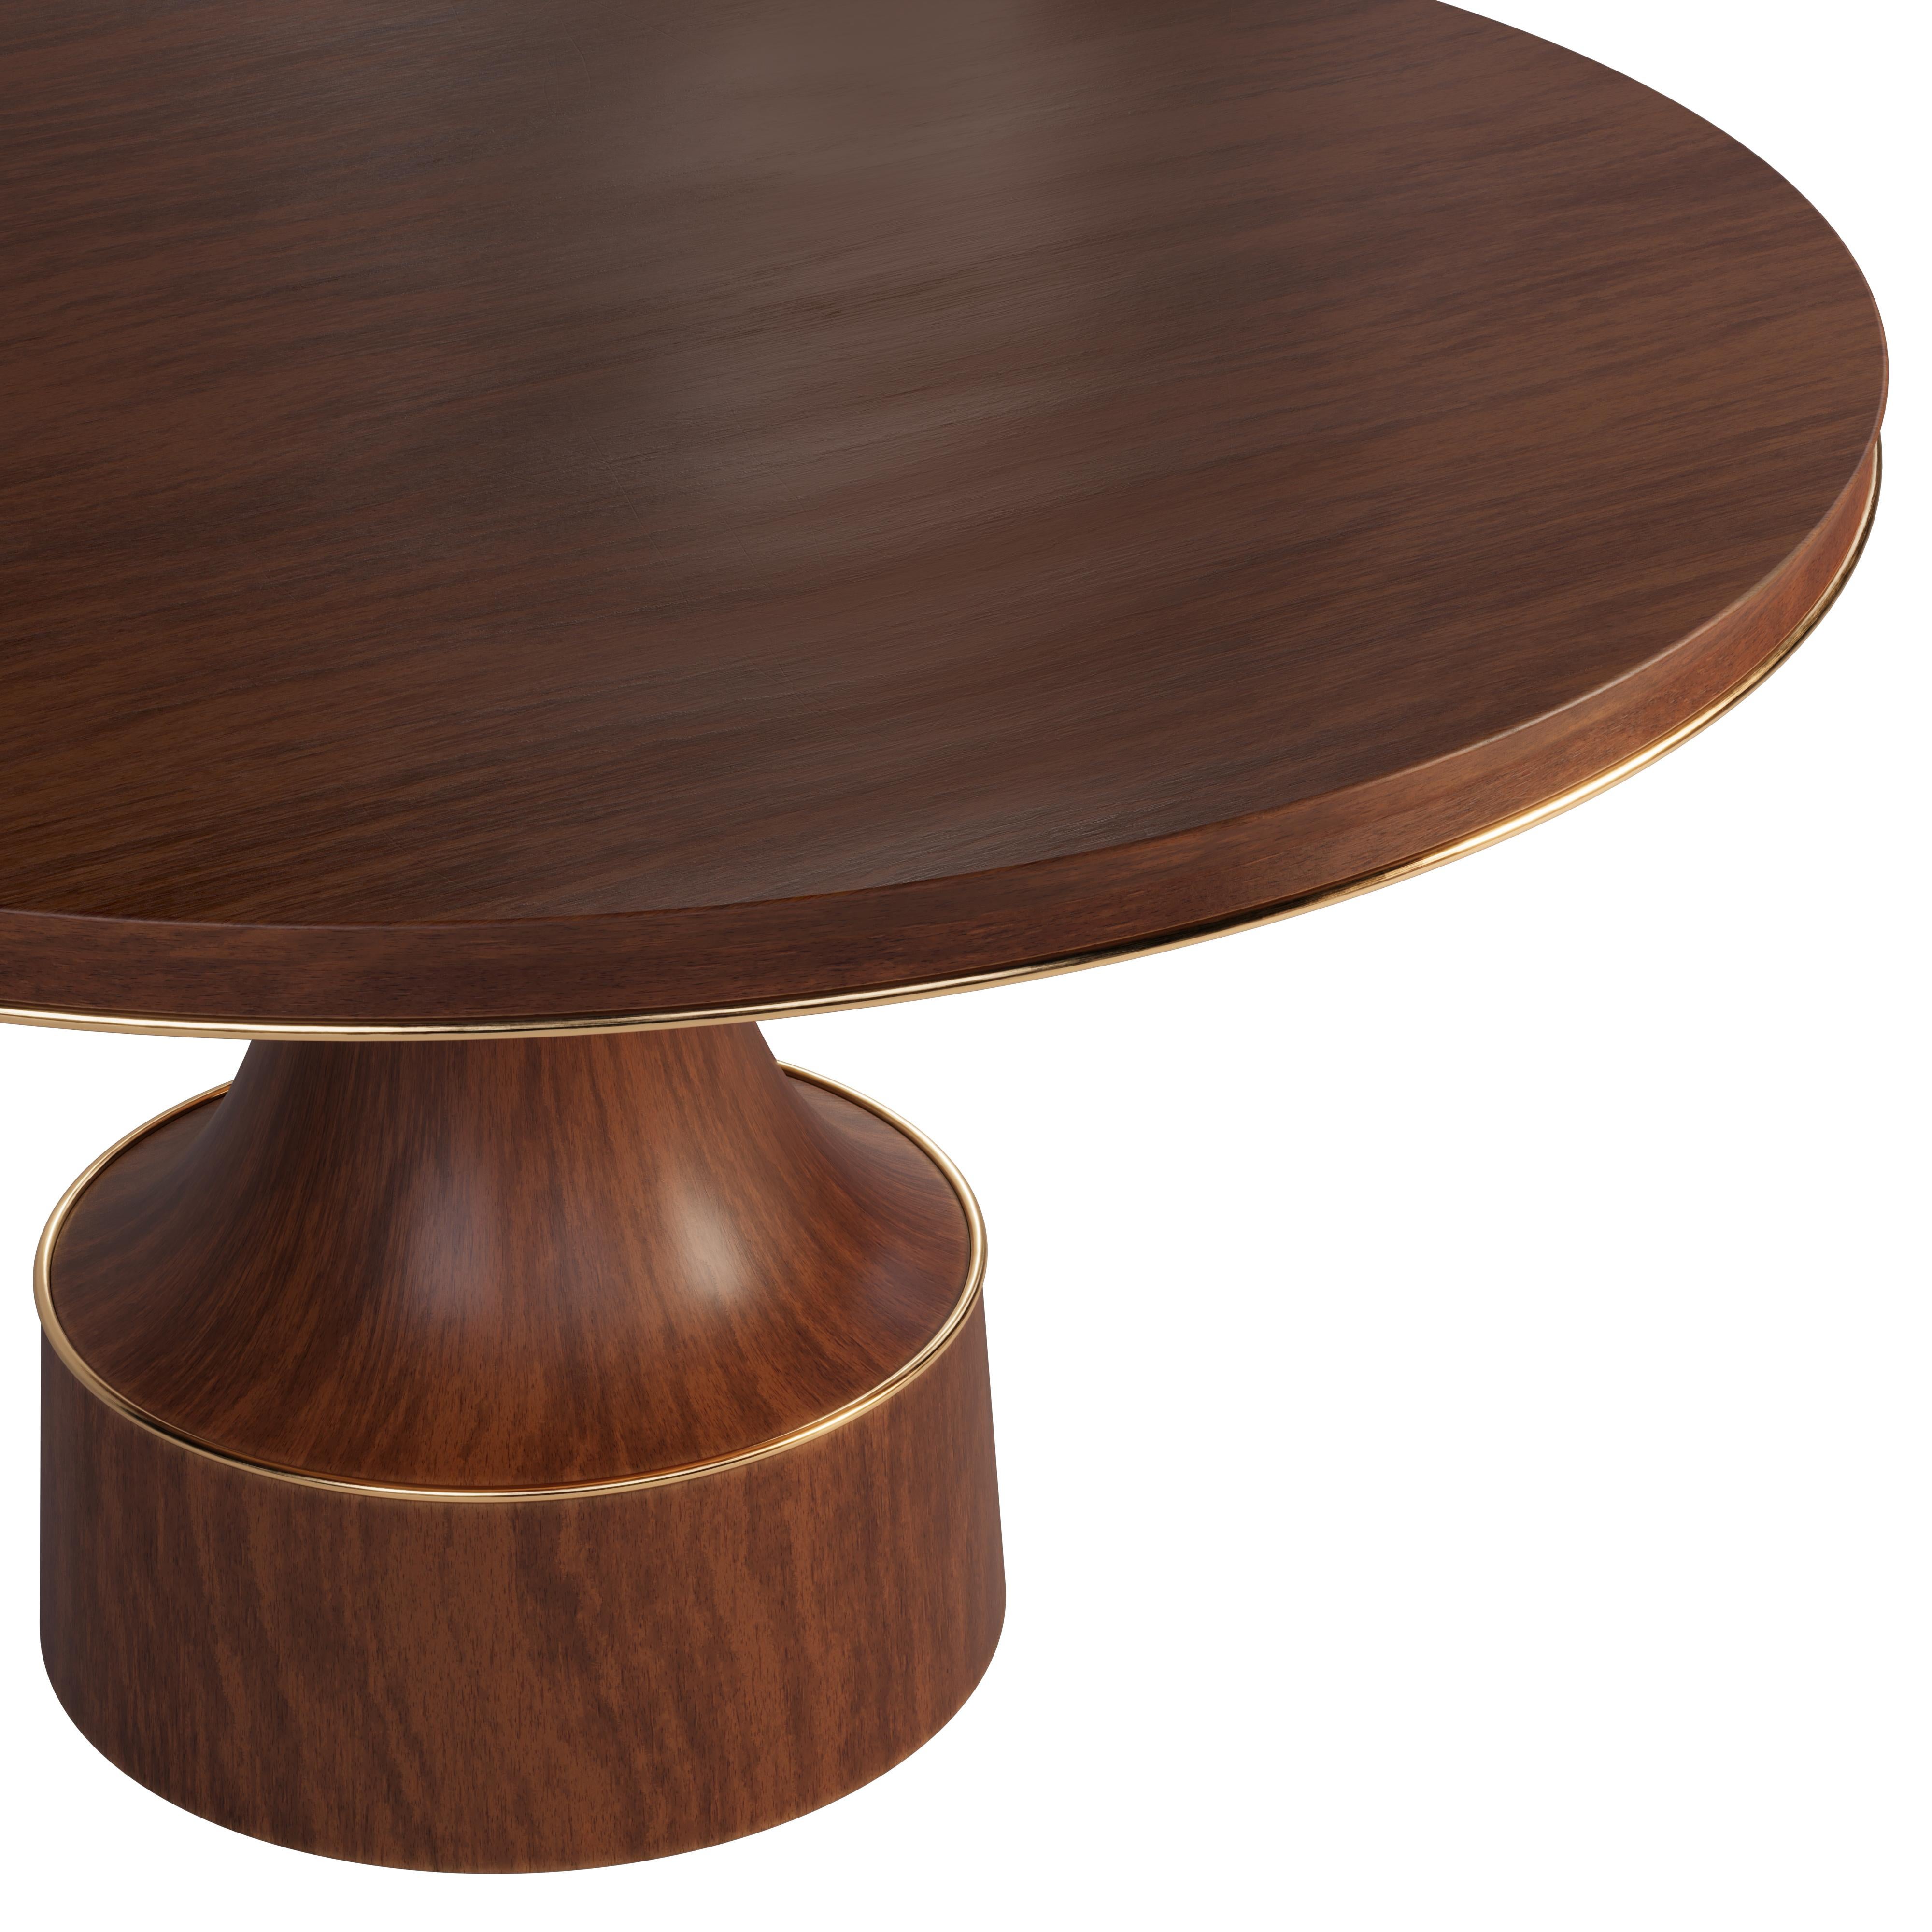 Portuguese 21st Century Buck Dining Table Walnut Wood For Sale